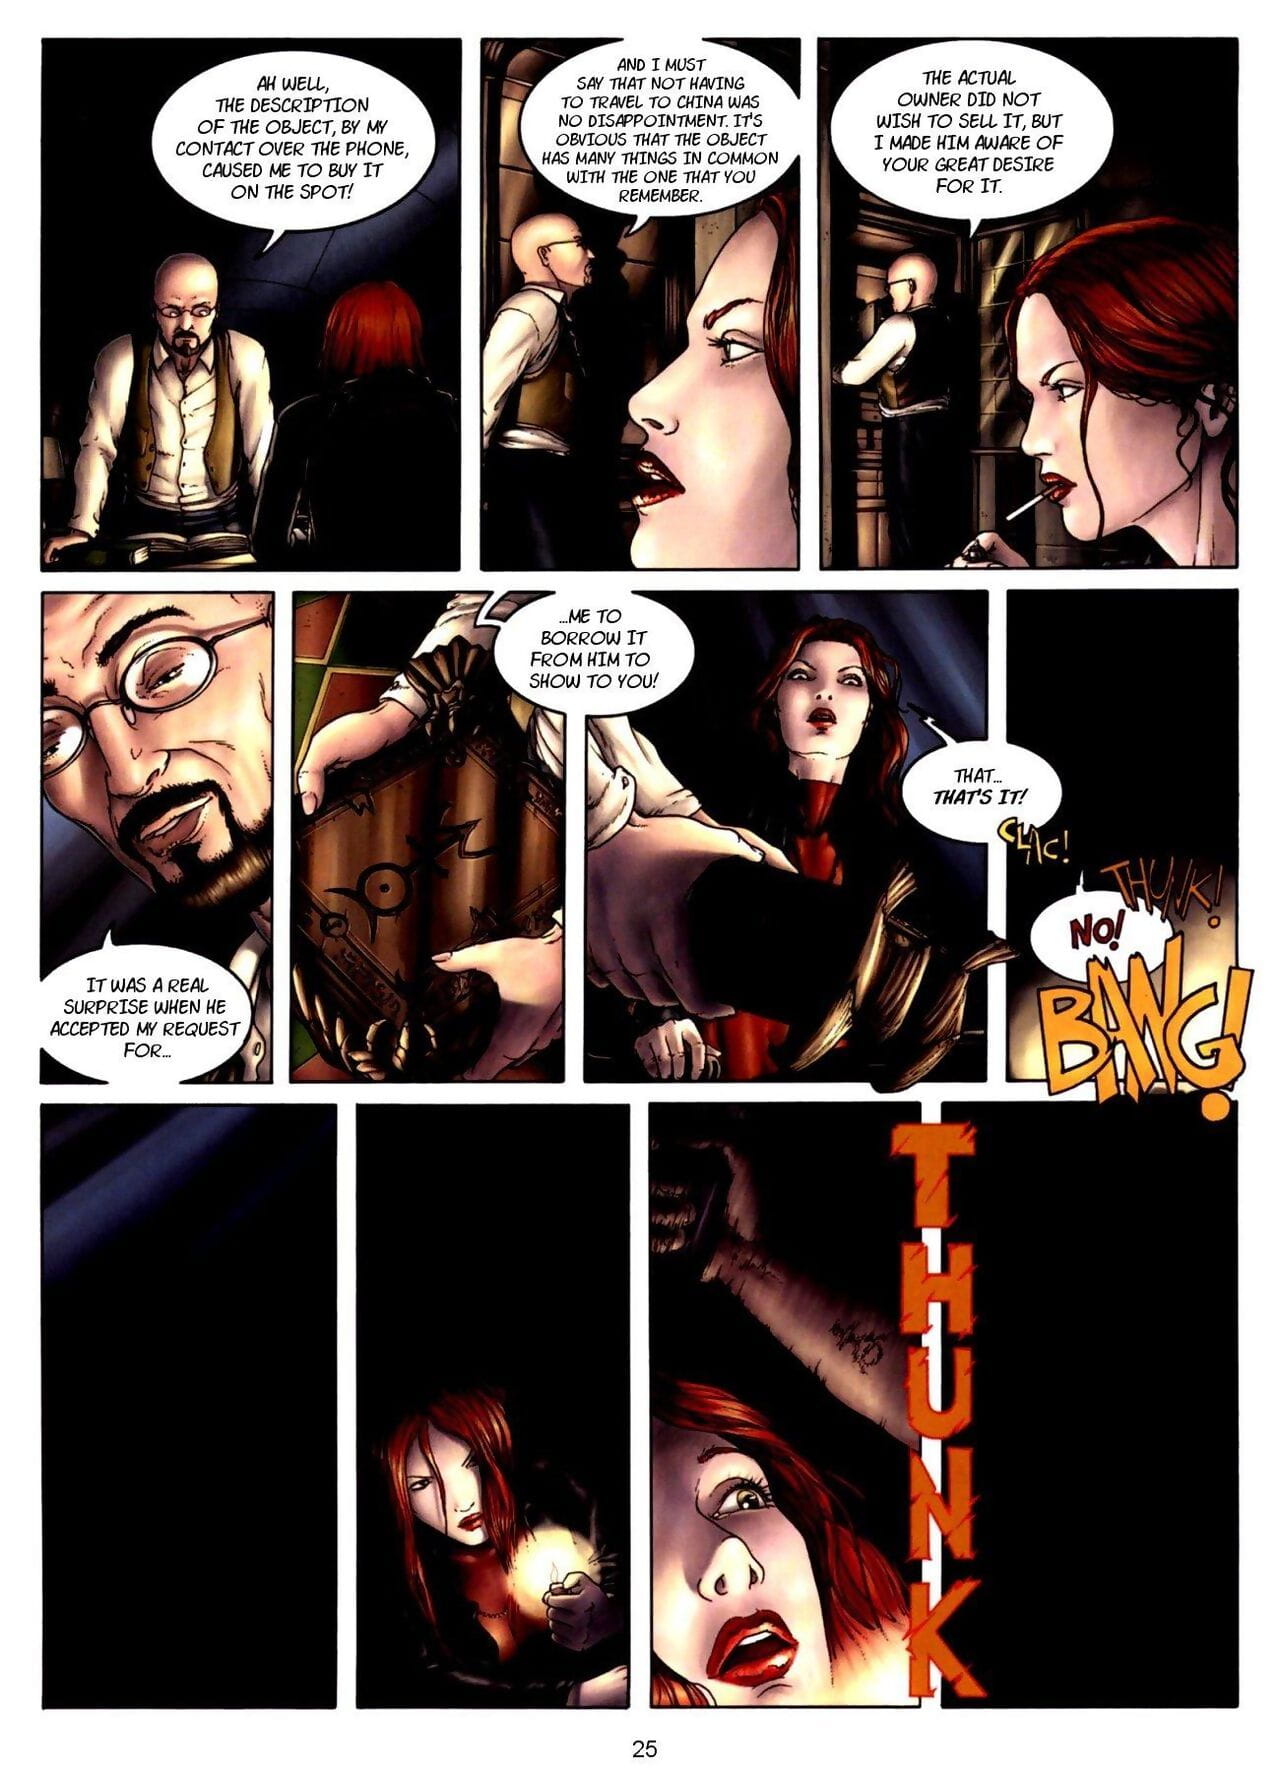 Sophia - Book 1: Old Trouble page 1